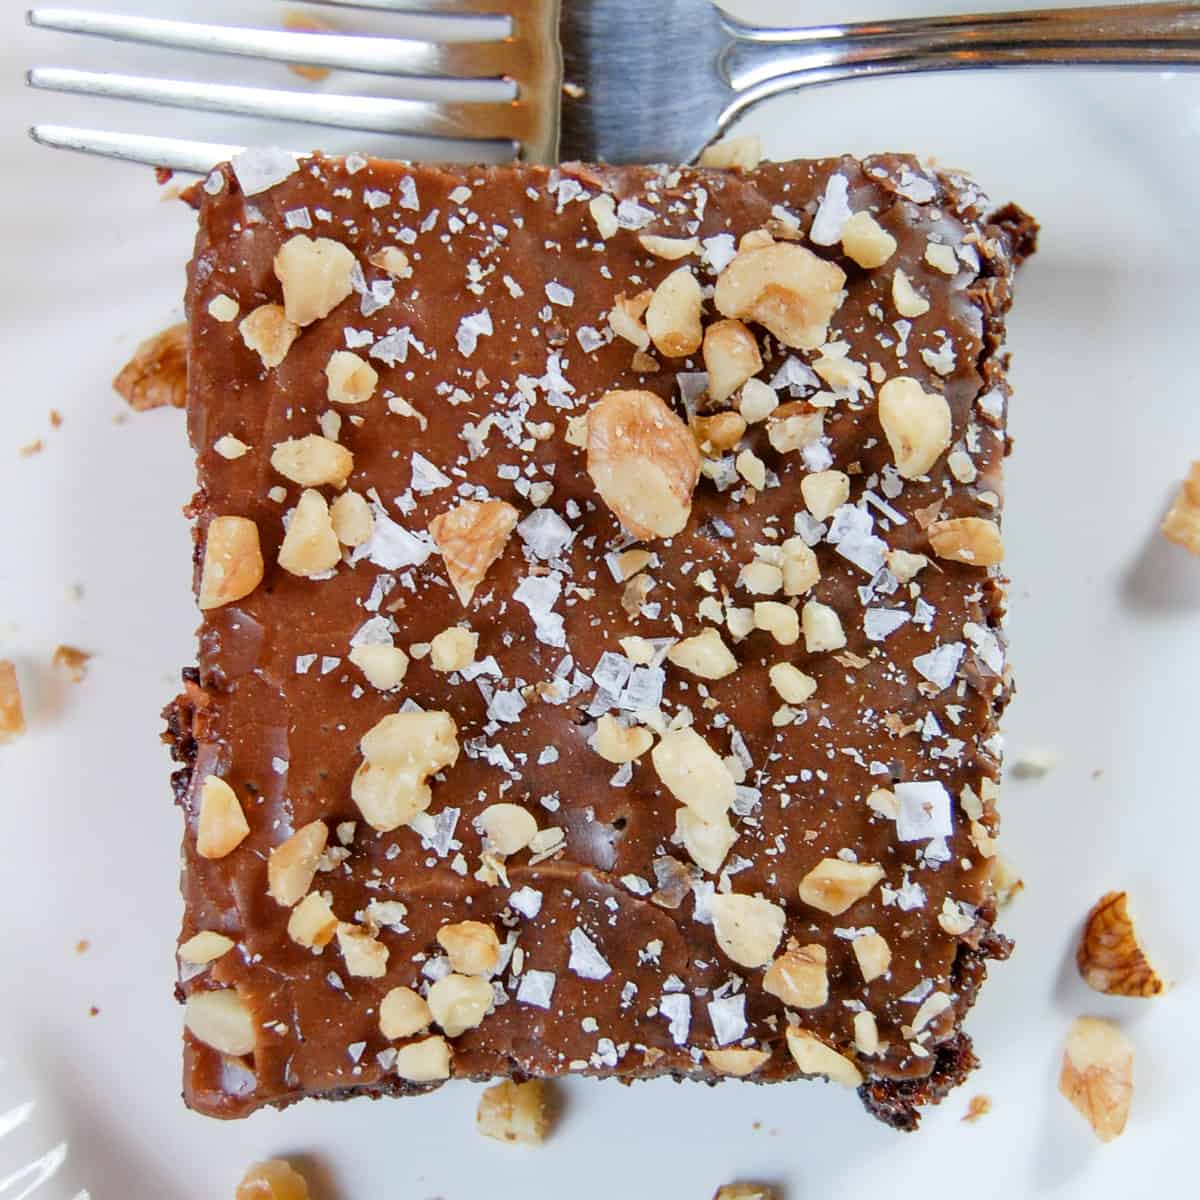 slice of texas chocolate sheet cake topped with chopped walnuts and flaked sea salt